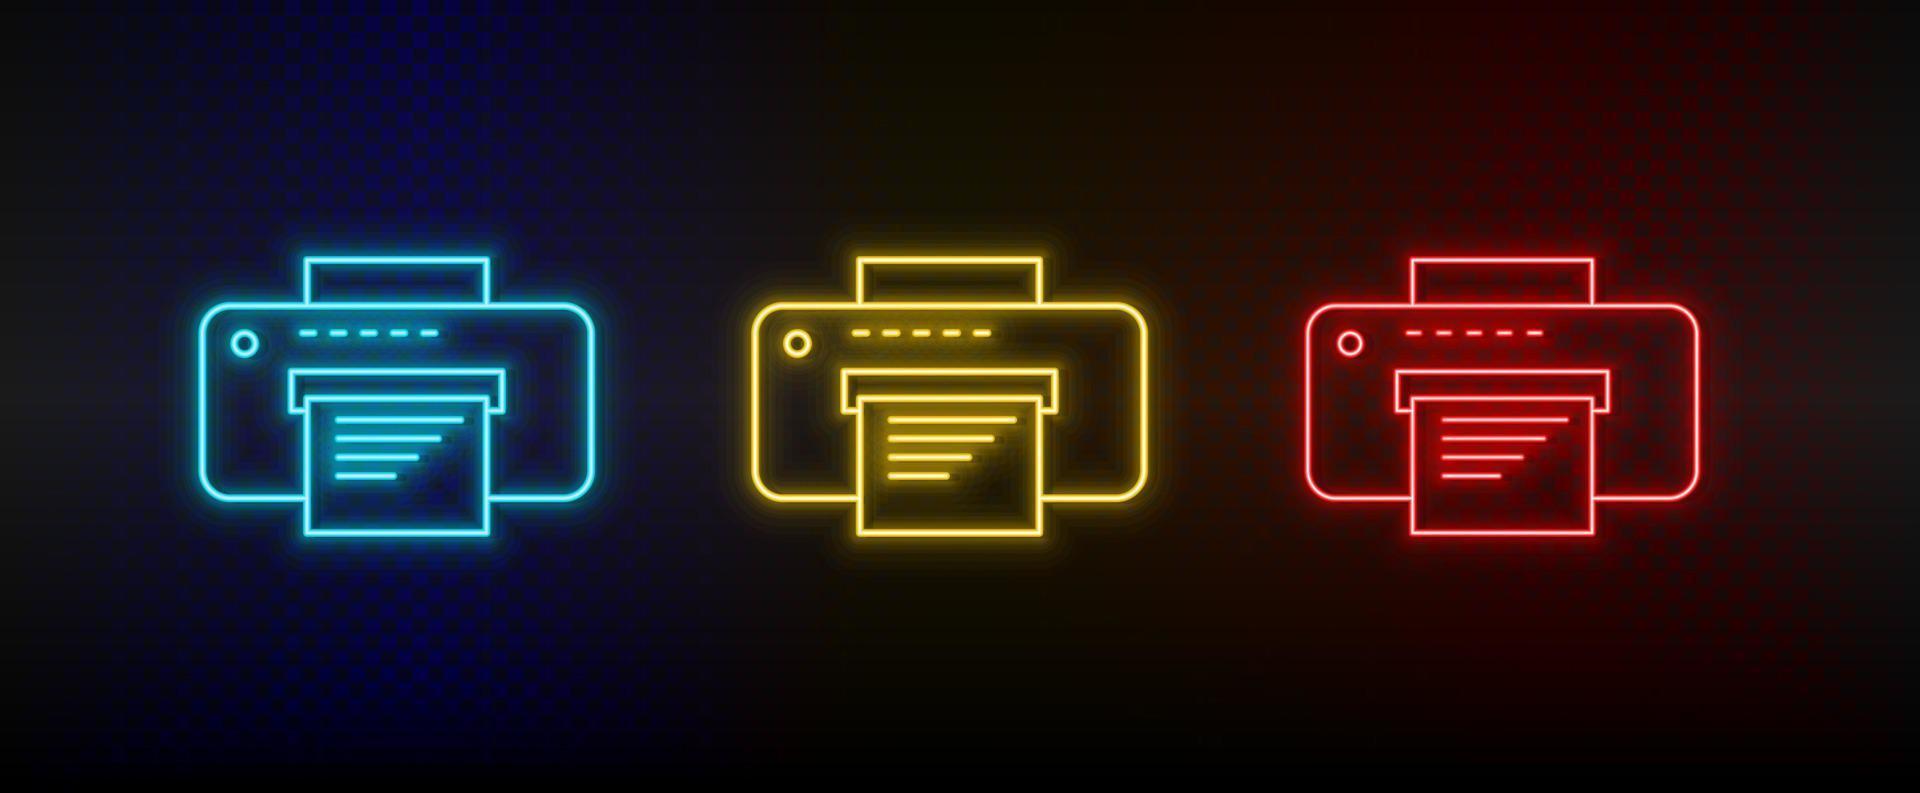 Neon icon set Copy printer. Set of red, blue, yellow neon vector icon on transparency dark background